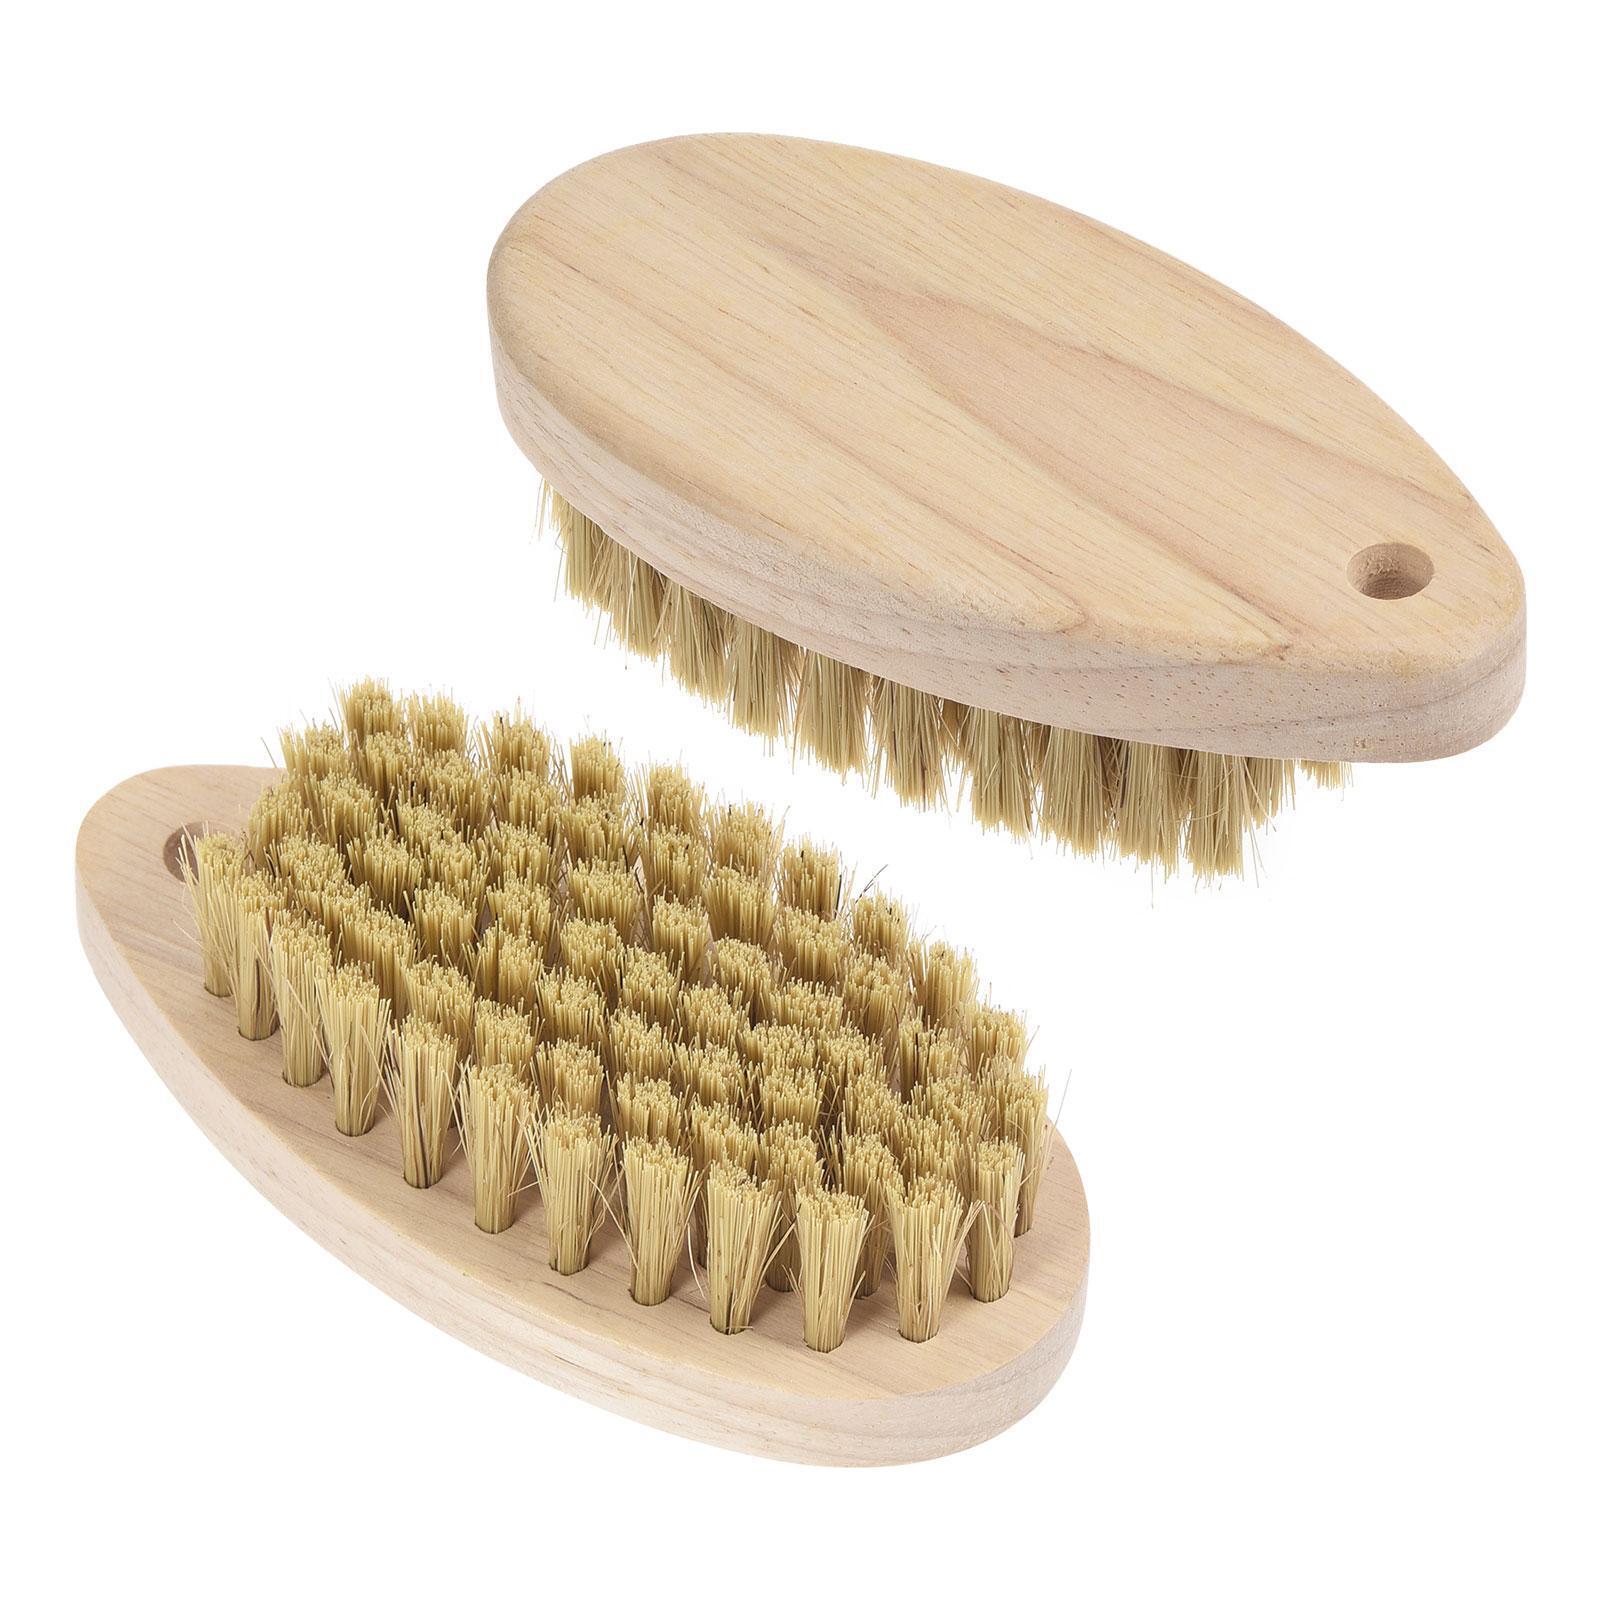 4.3 Inches Shoe Cleaning Brush, 2 Pack Shoe Cleaning Scrubber Wooden Color